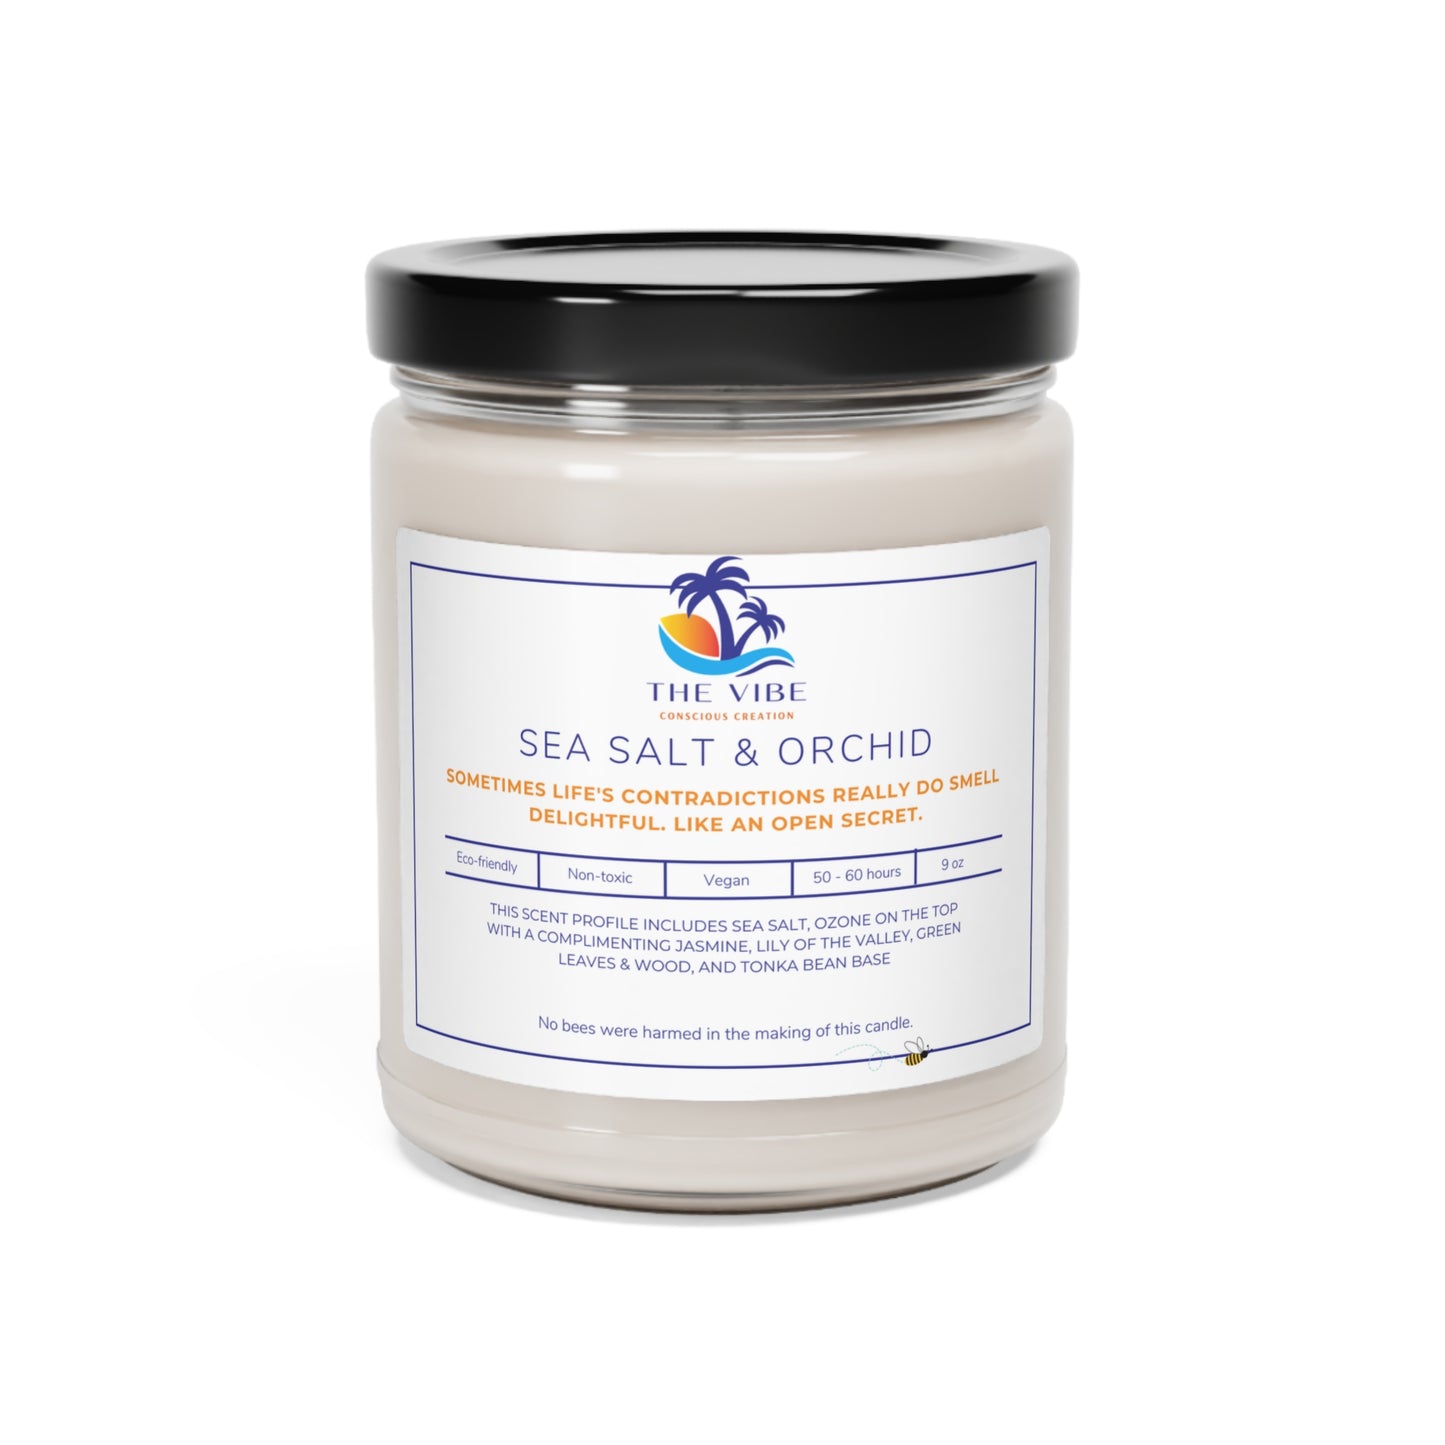 Sea Salt & Orchid, Quirky Scented Candle 9oz